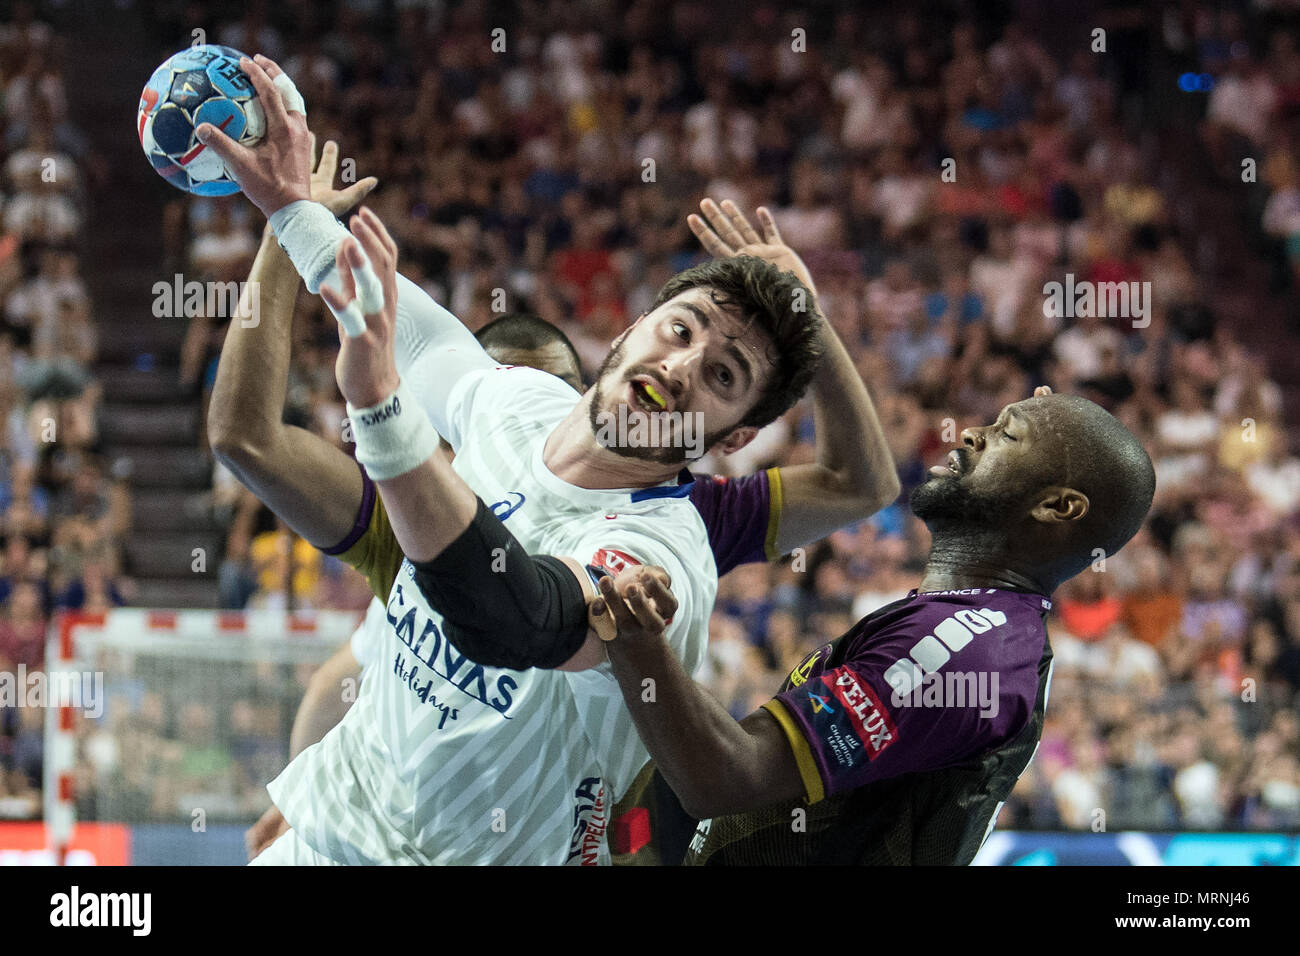 27 May 2018, Germany, Cologne: Handball Champions League final, HBC Nantes vs Montpellier HB at the Lanxess Arena: Rock Feliho (r) of Nantes and Ludovic Fabregas (l) of Montpellier vie for the ball. Photo: Federico Gambarini/dpa Stock Photo